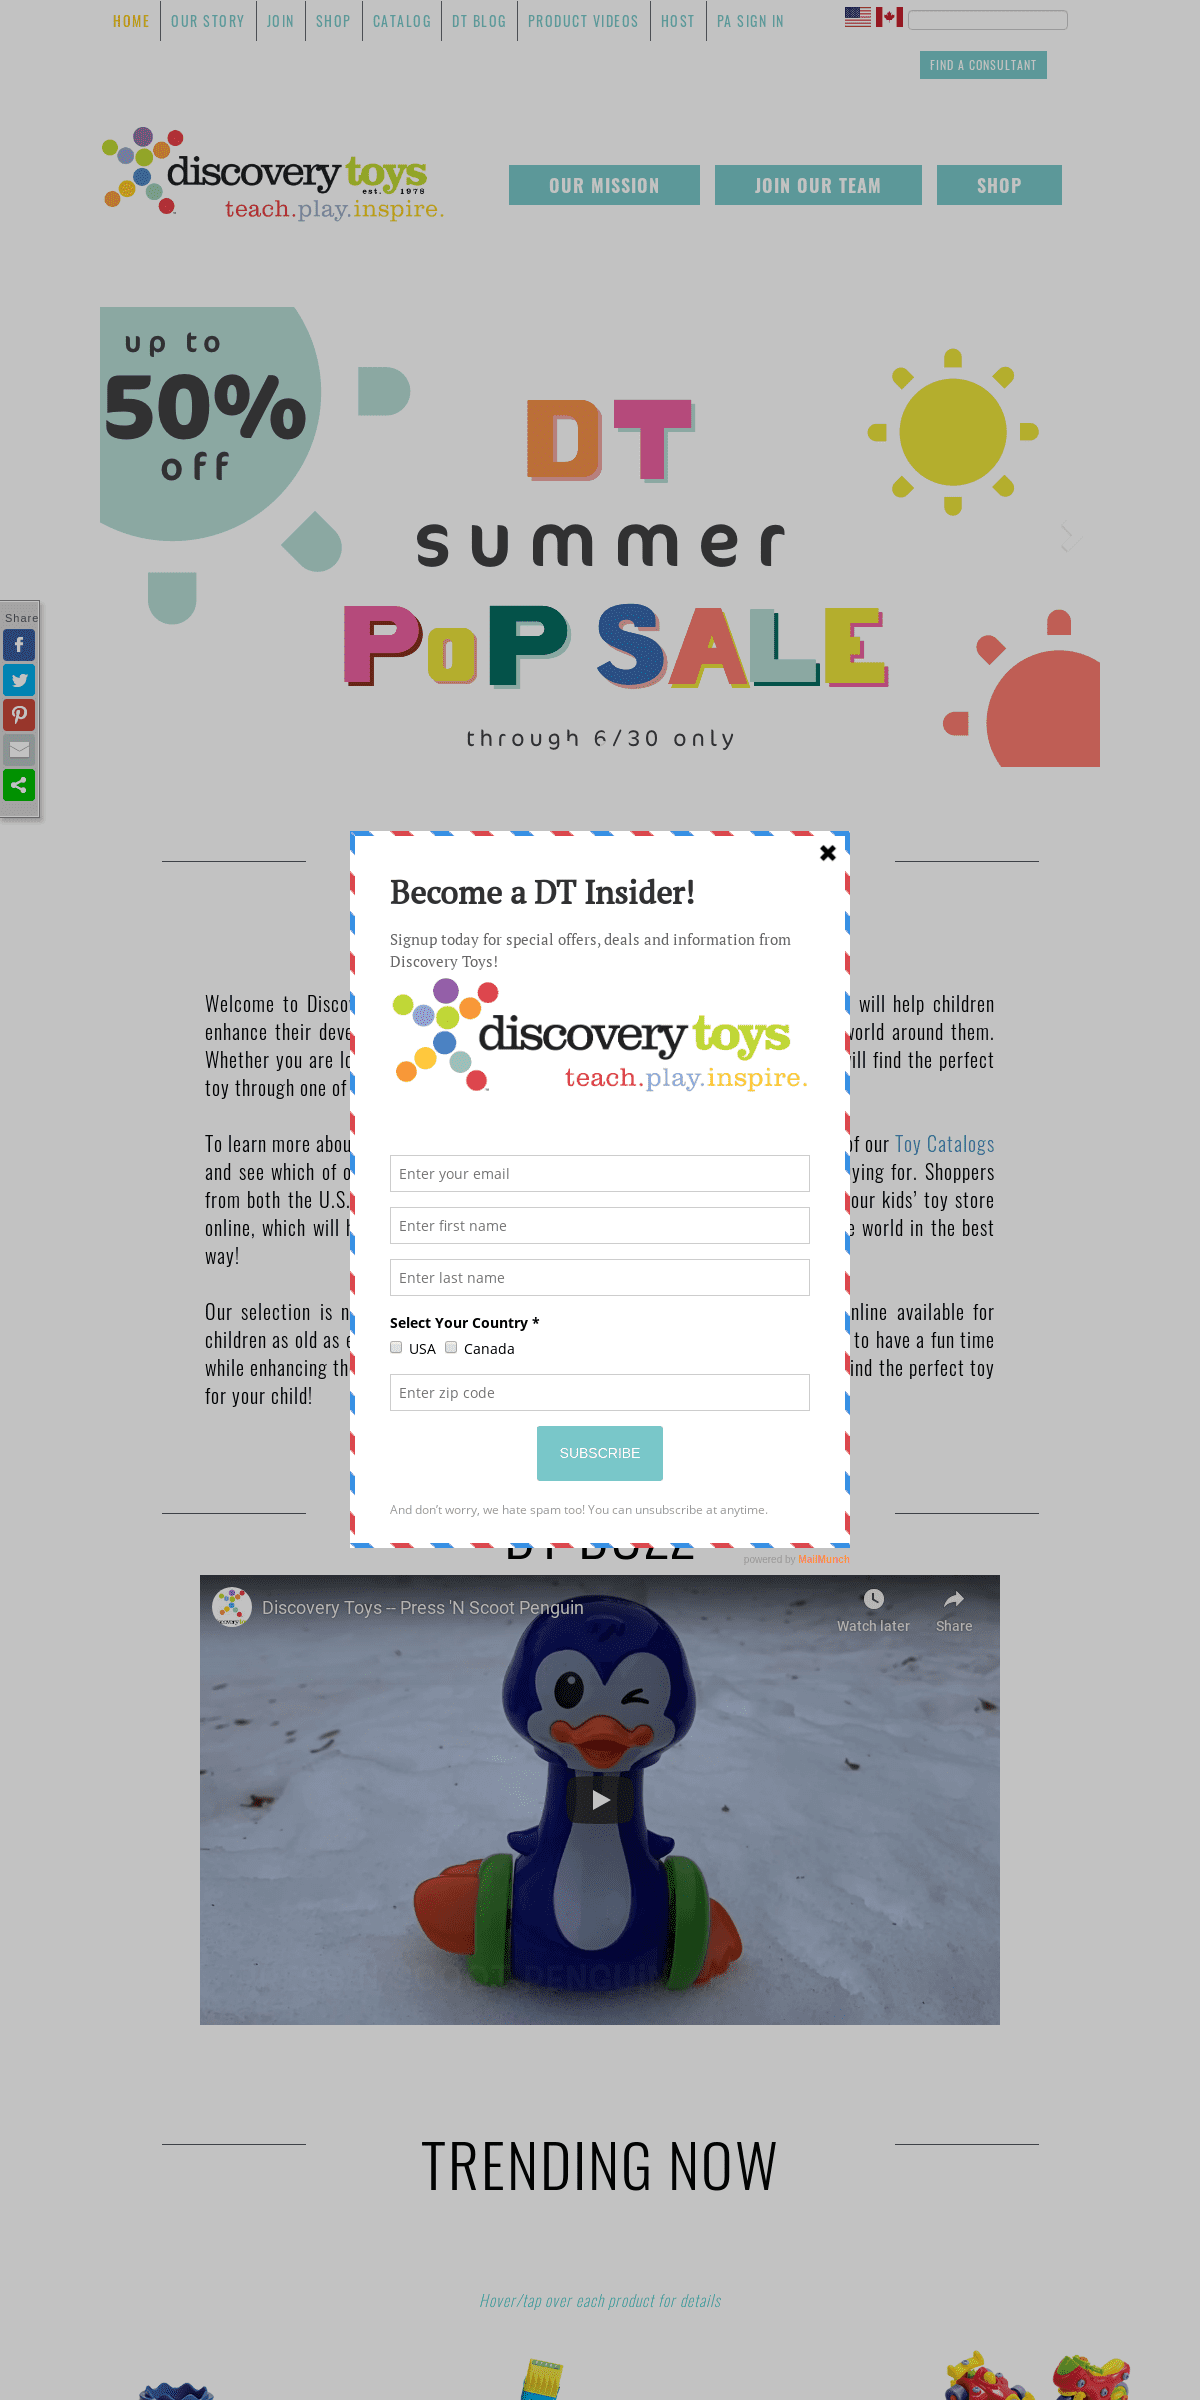 A complete backup of discoverytoys.com